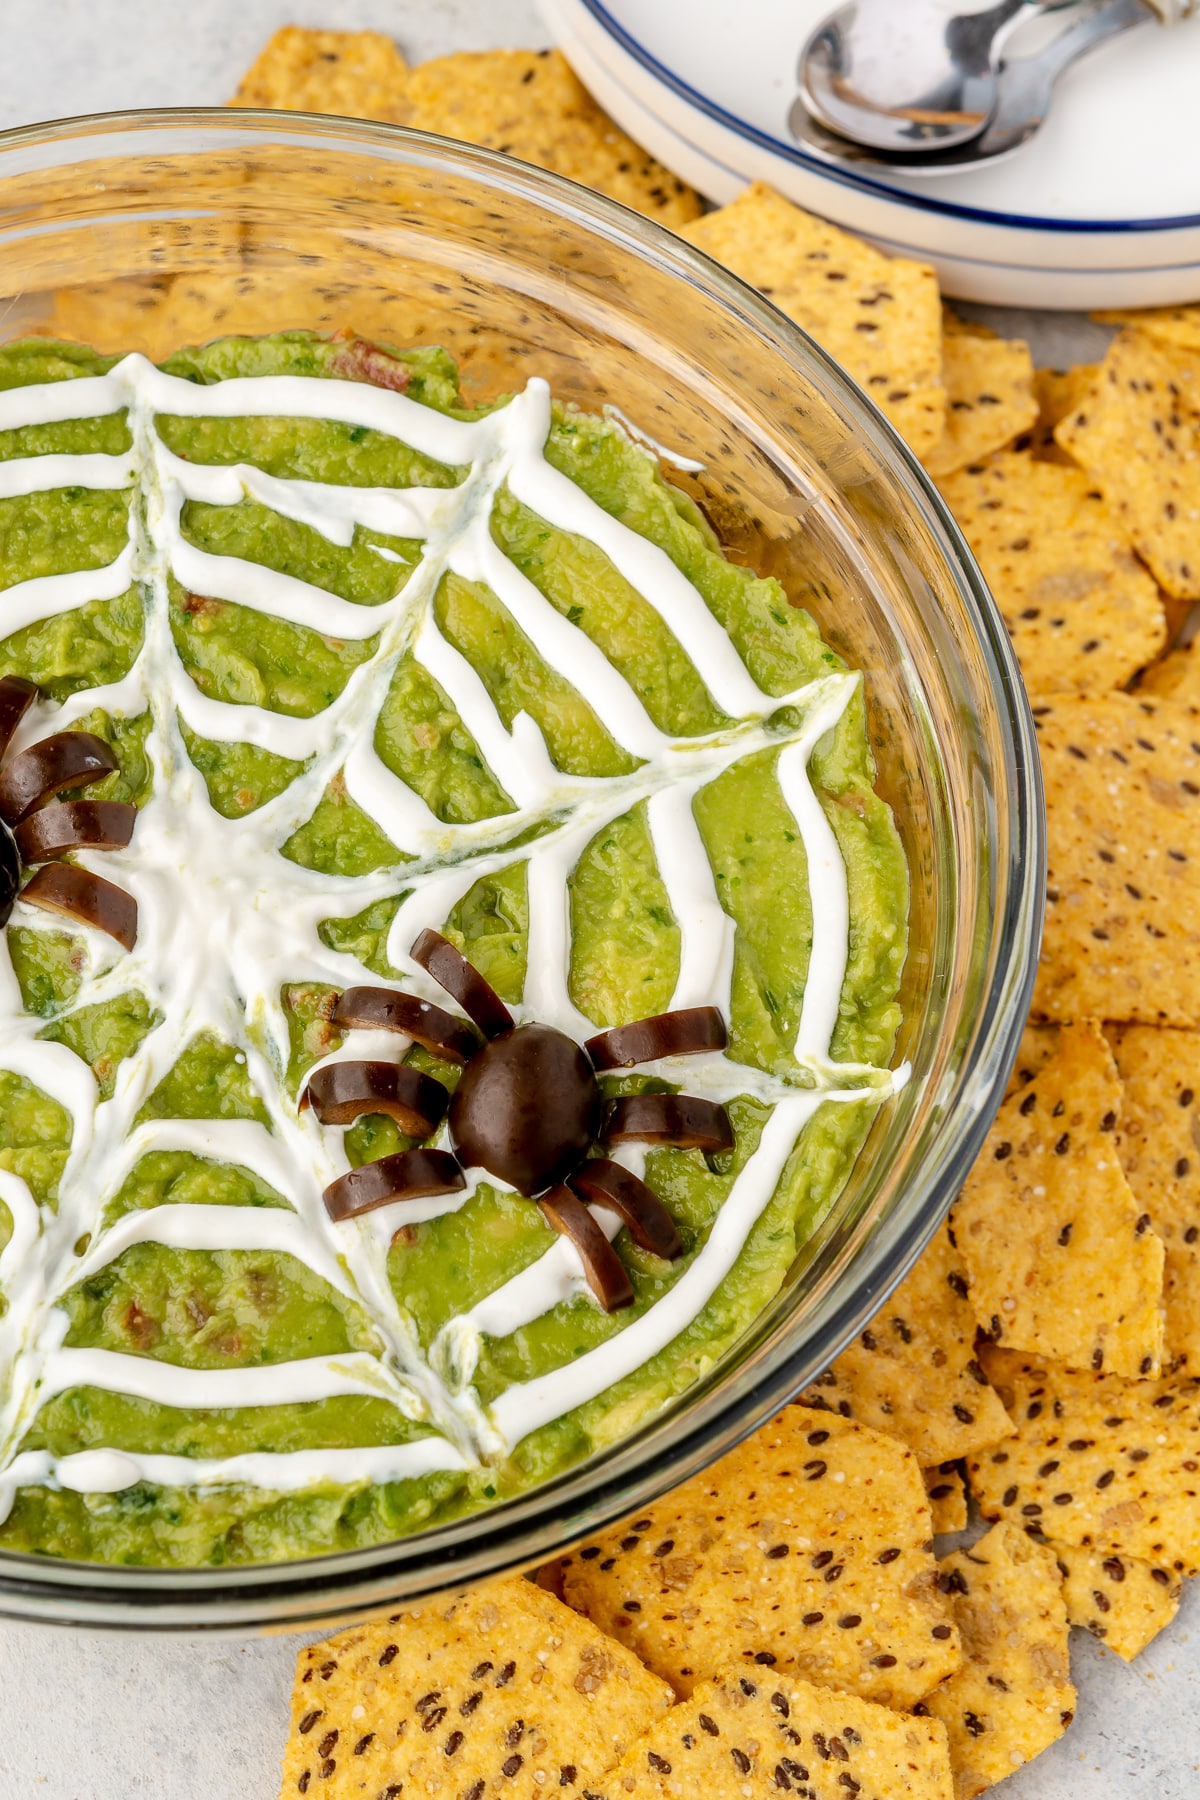 A finished bowl of spooky 7 layer dip complete with a sour cream spider web and black olive spiders on top next to corn chips.